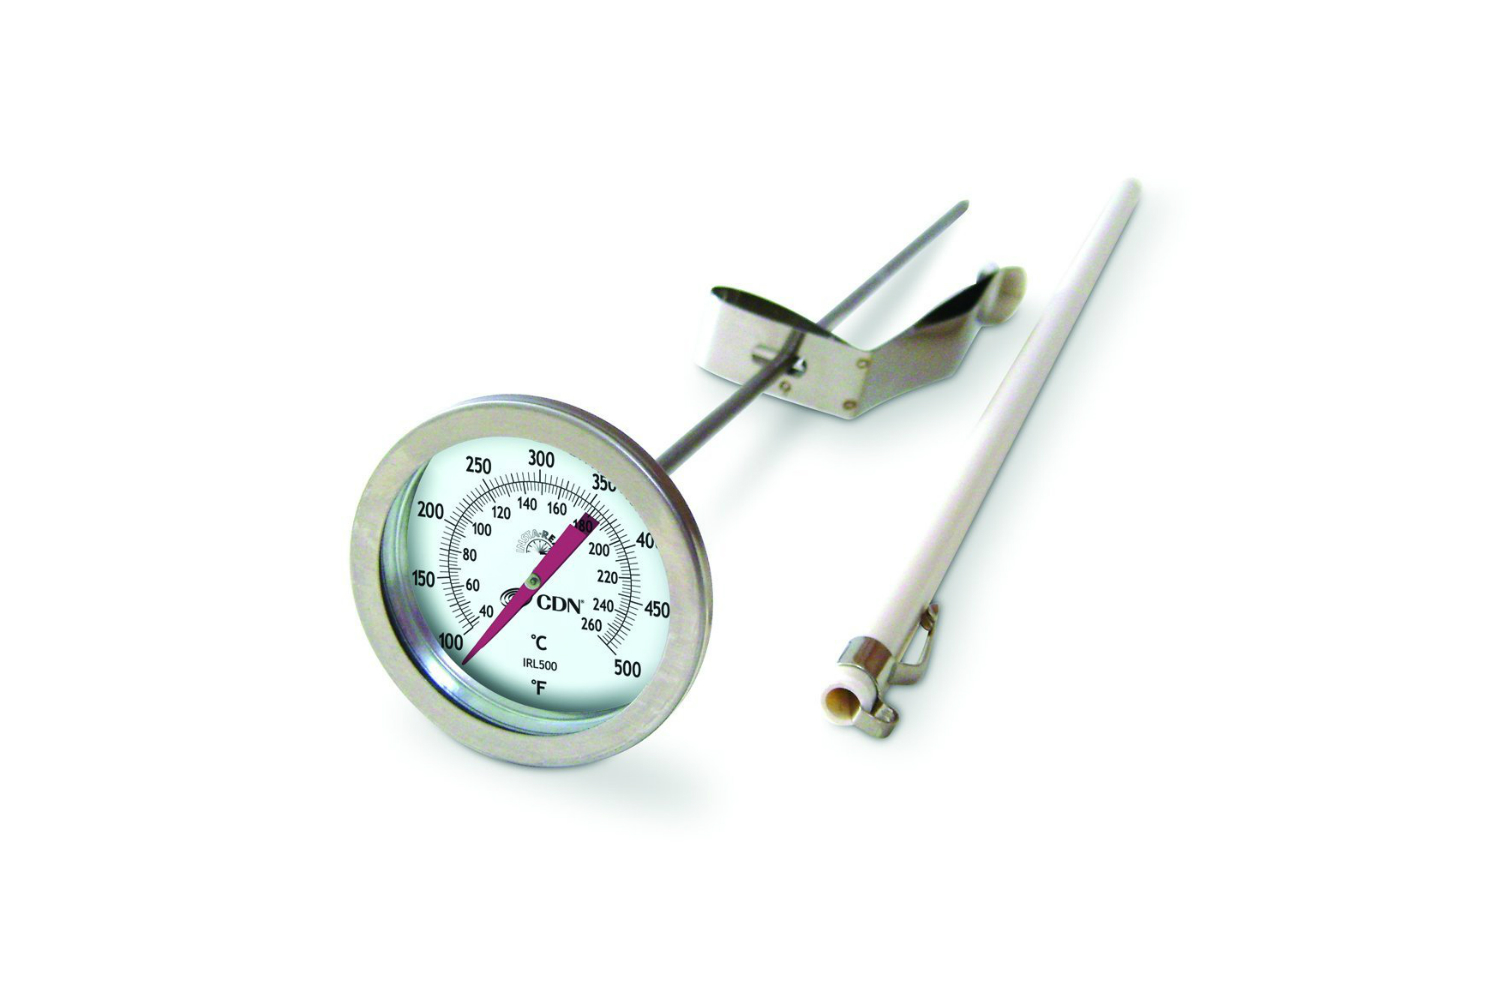 https://www.themanual.com/wp-content/uploads/sites/9/2018/11/meat-thermometer.jpg?fit=800%2C800&p=1